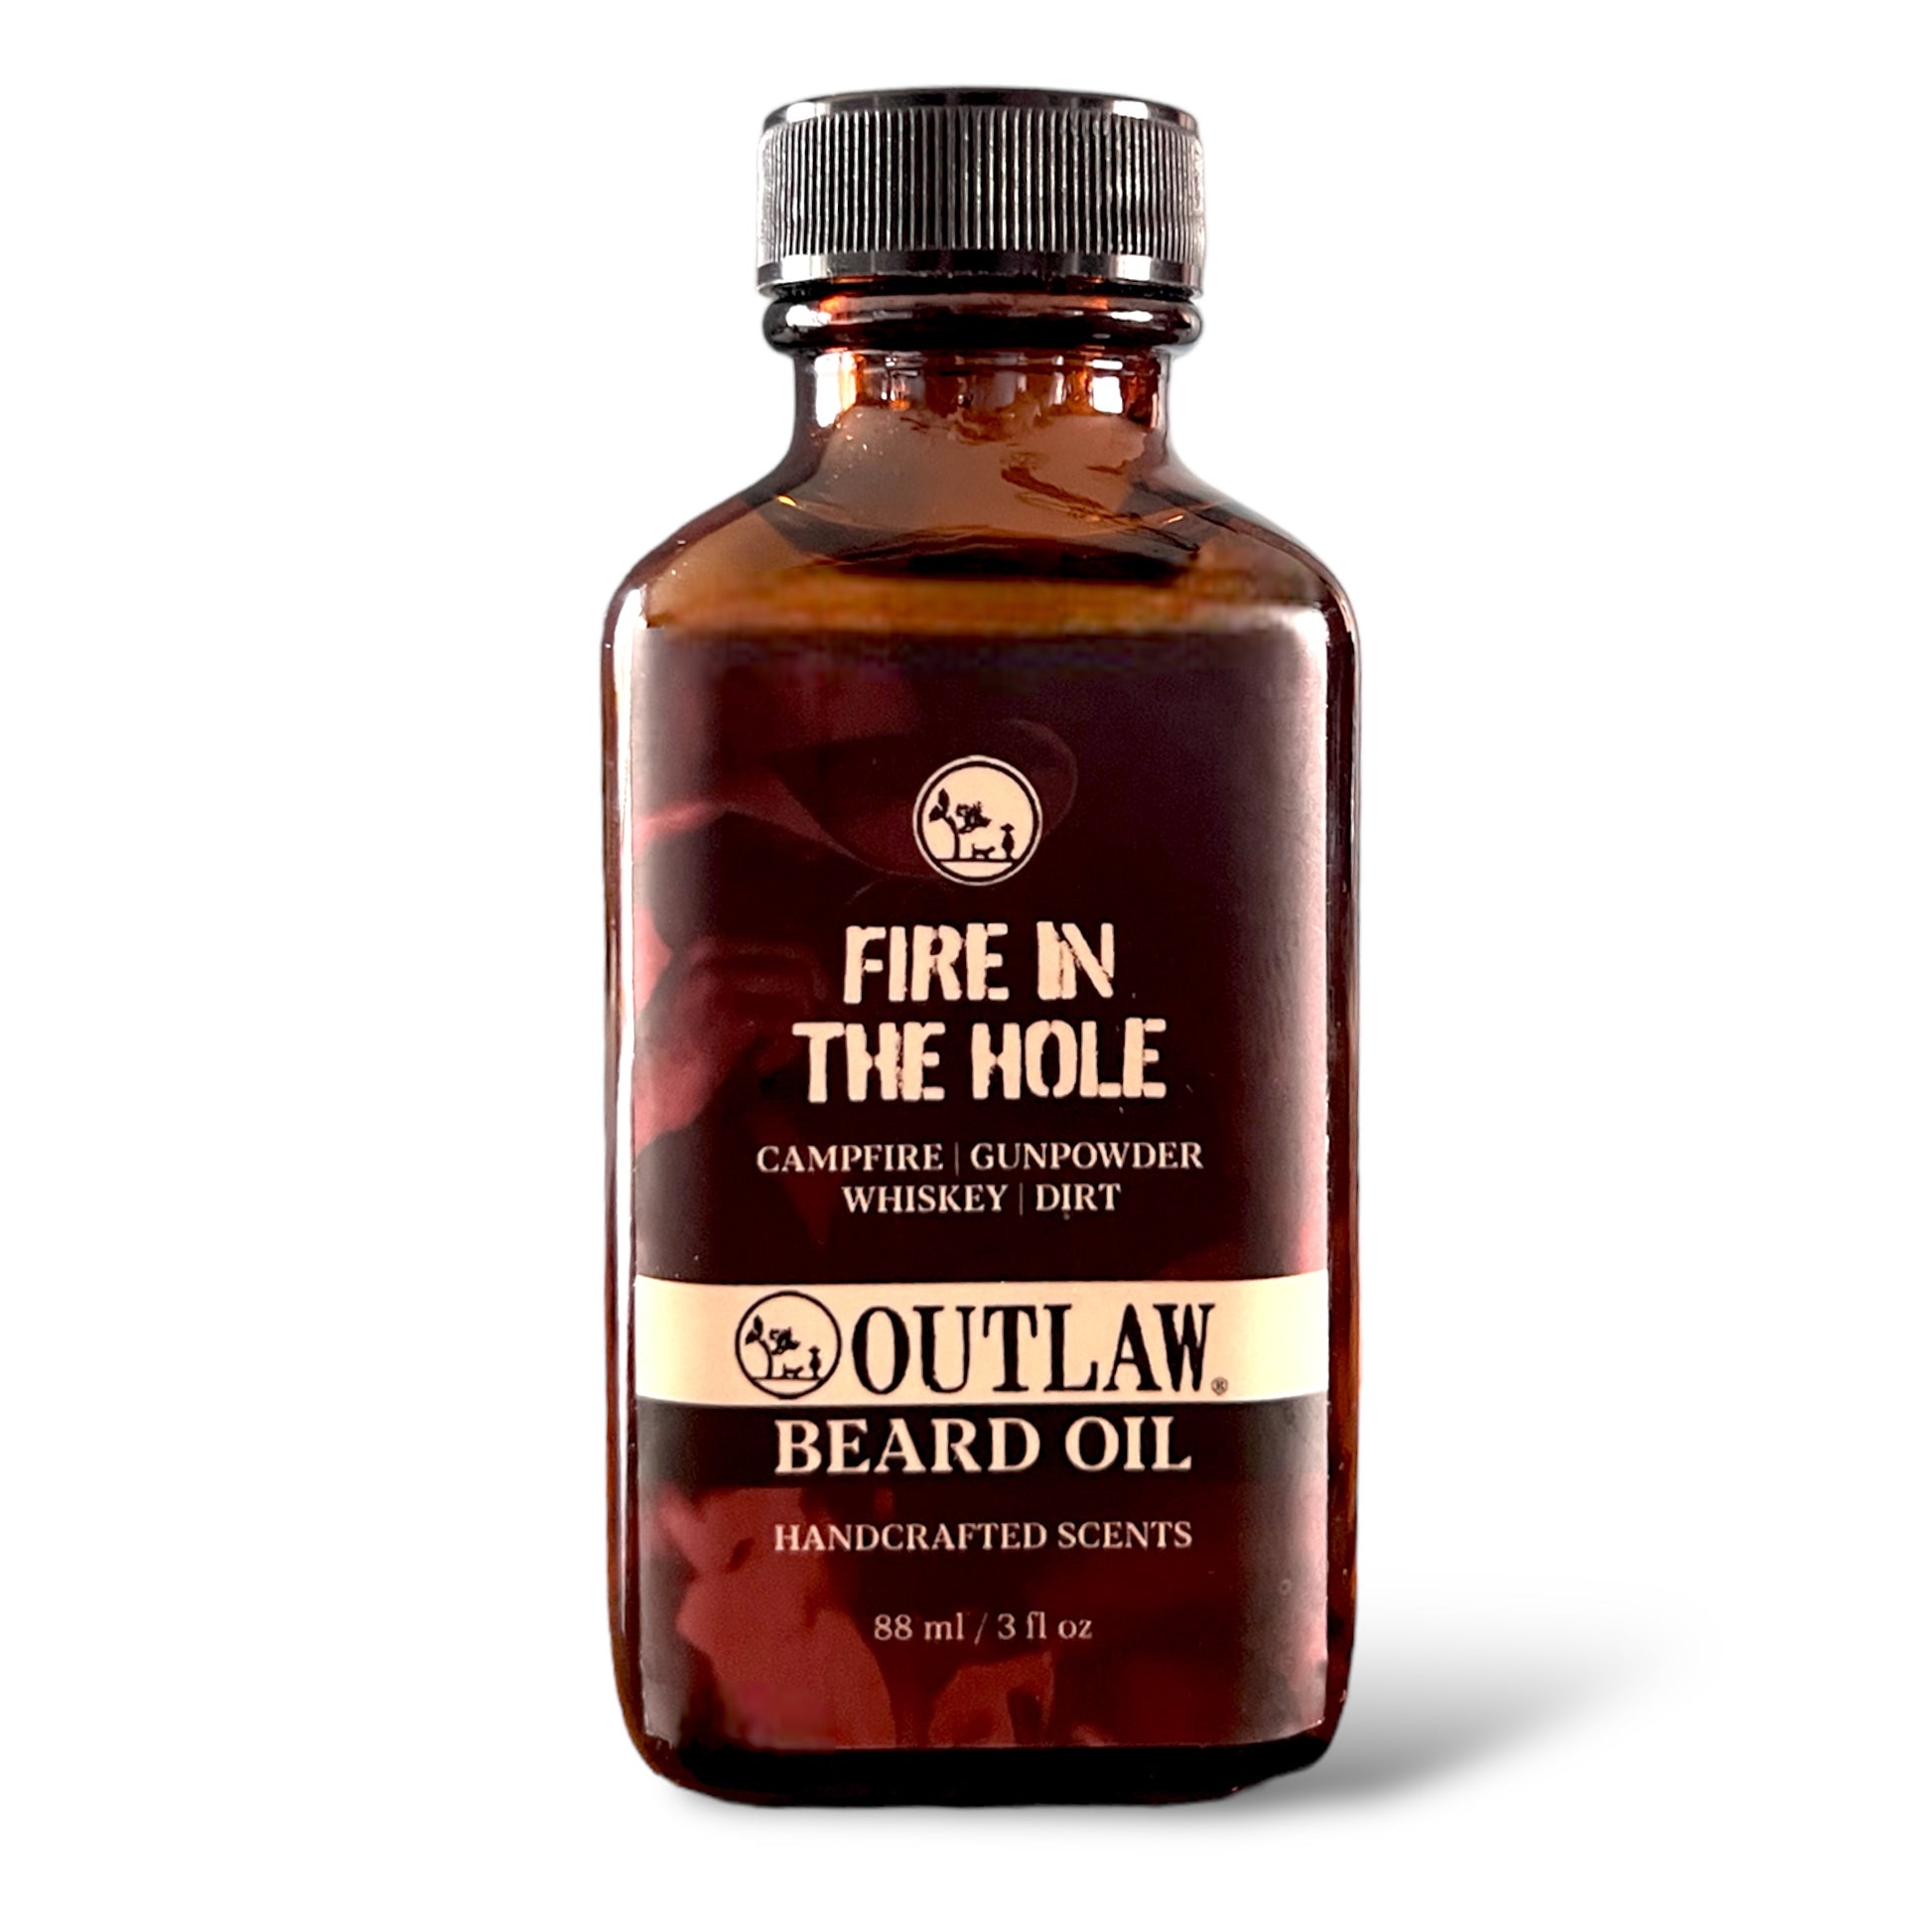 Campfire scented beard oil by Outlaw